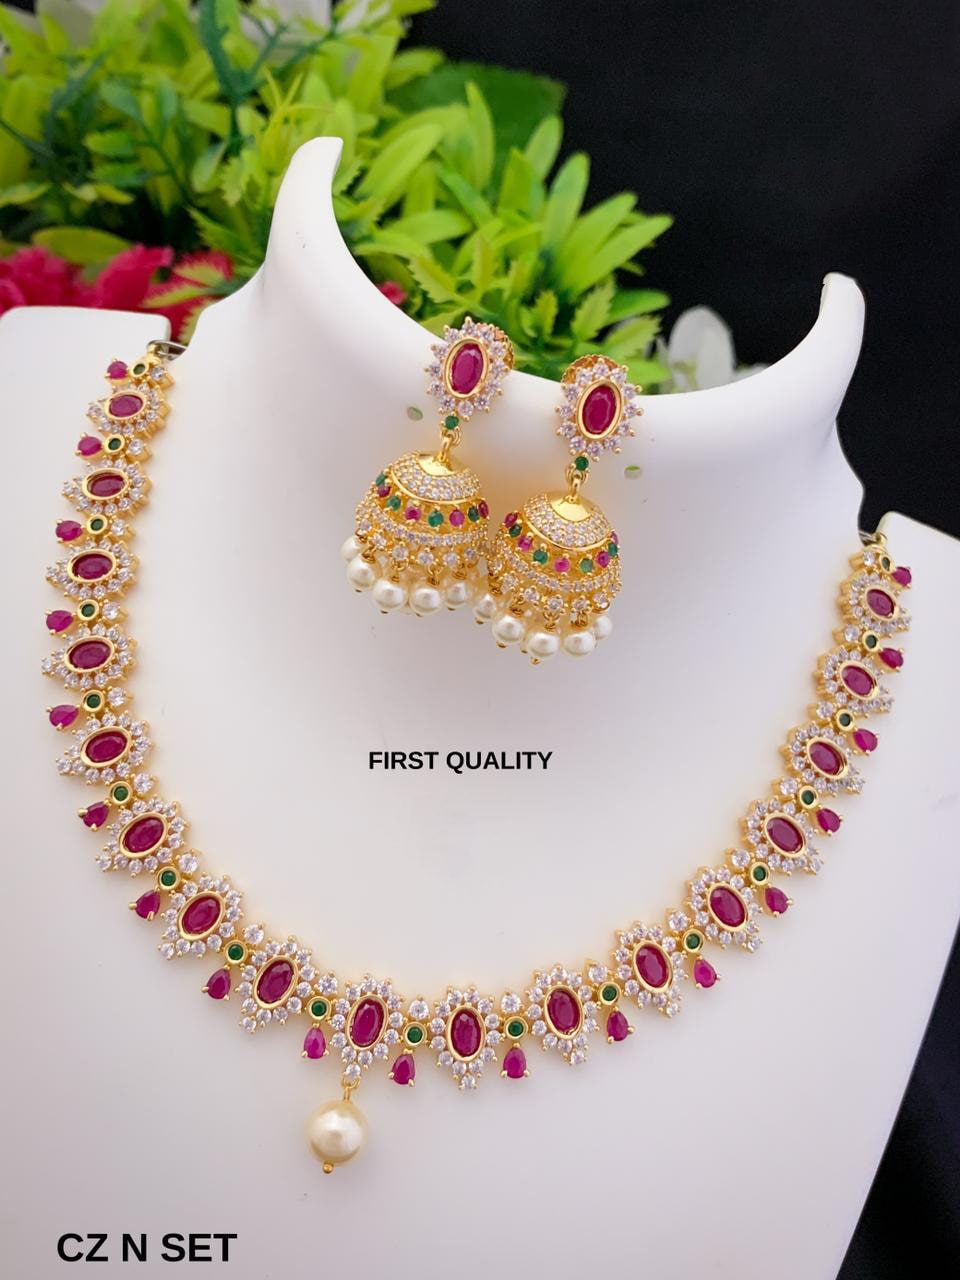 Cz American diamond ruby and green stone gold necklace with pearl drop earrings | necklace with single pearl drop | Jhumka Earrings